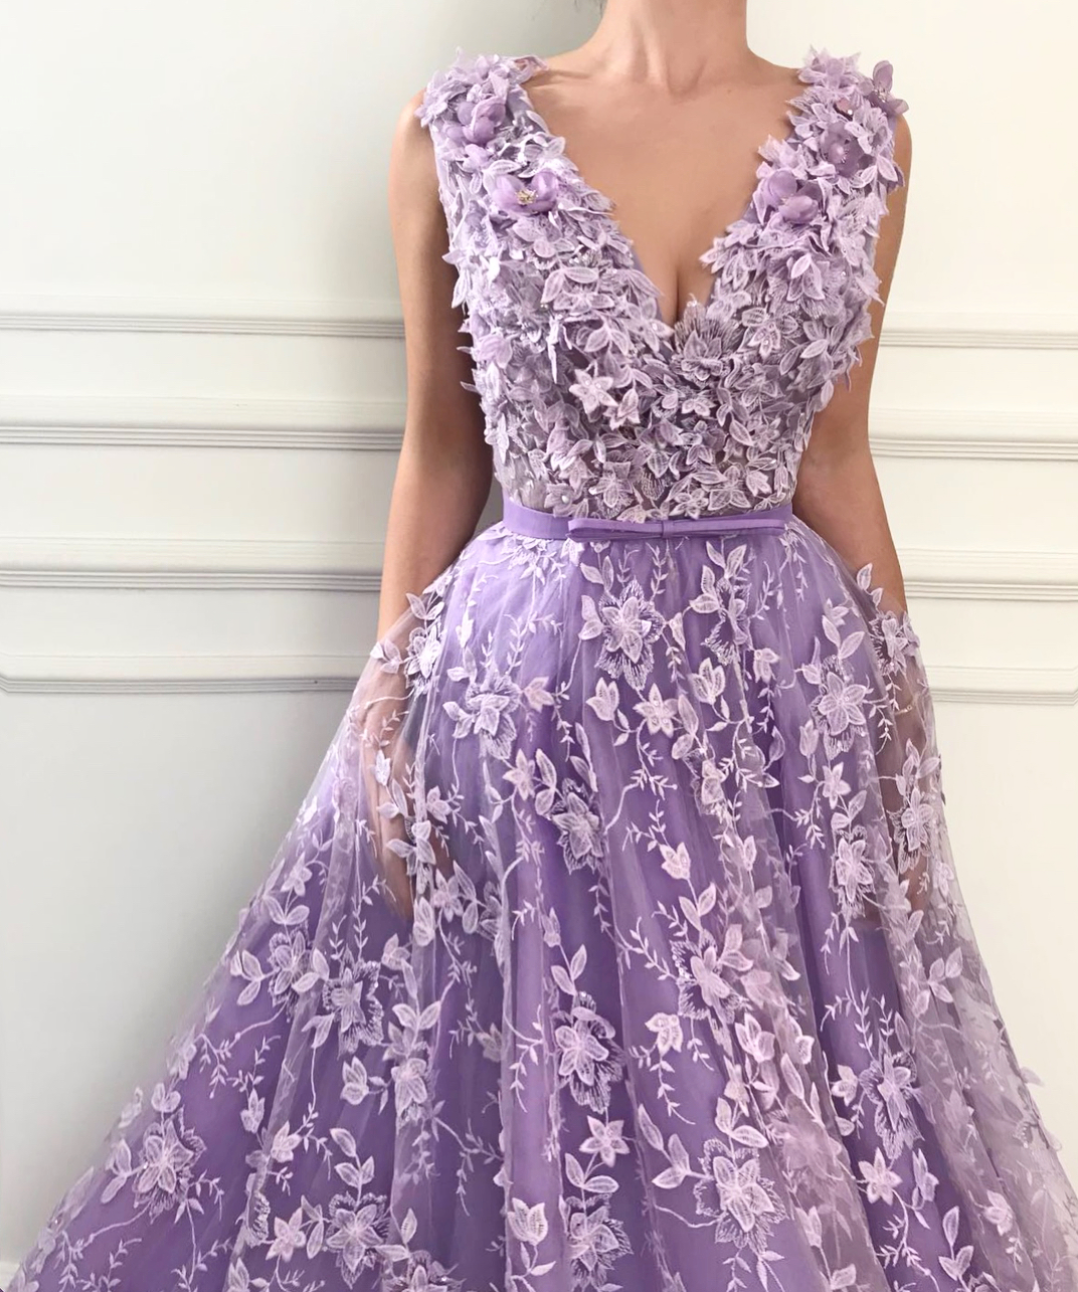 Purple A-Line dress with no sleeves, v-neck, lace and embroidery